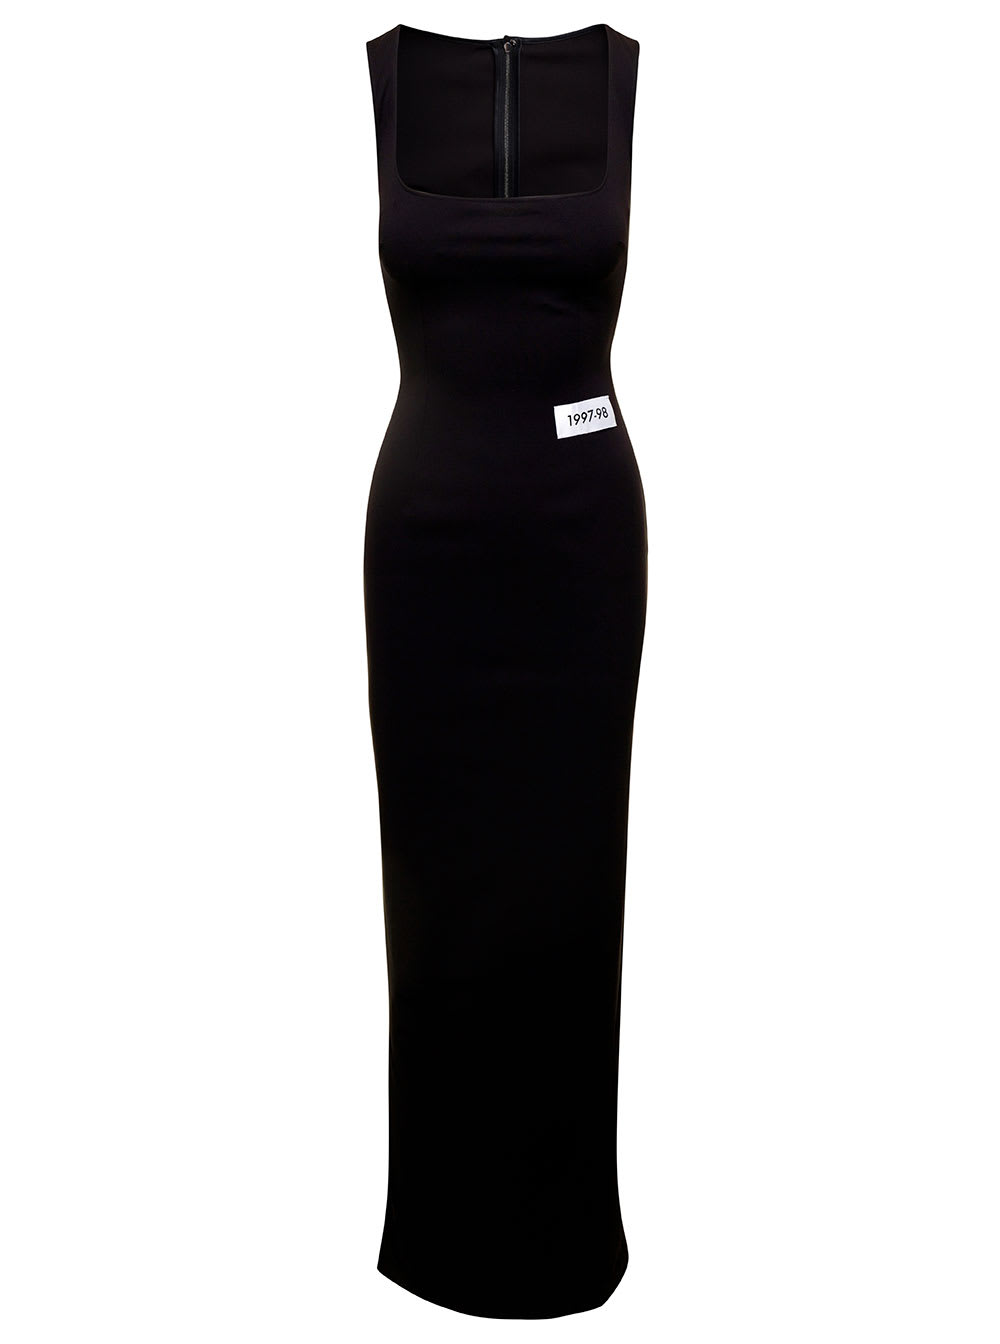 DOLCE & GABBANA BLACK FLOOR-LENGTH DRESS WITH PATCH IN RAYON WOMAN